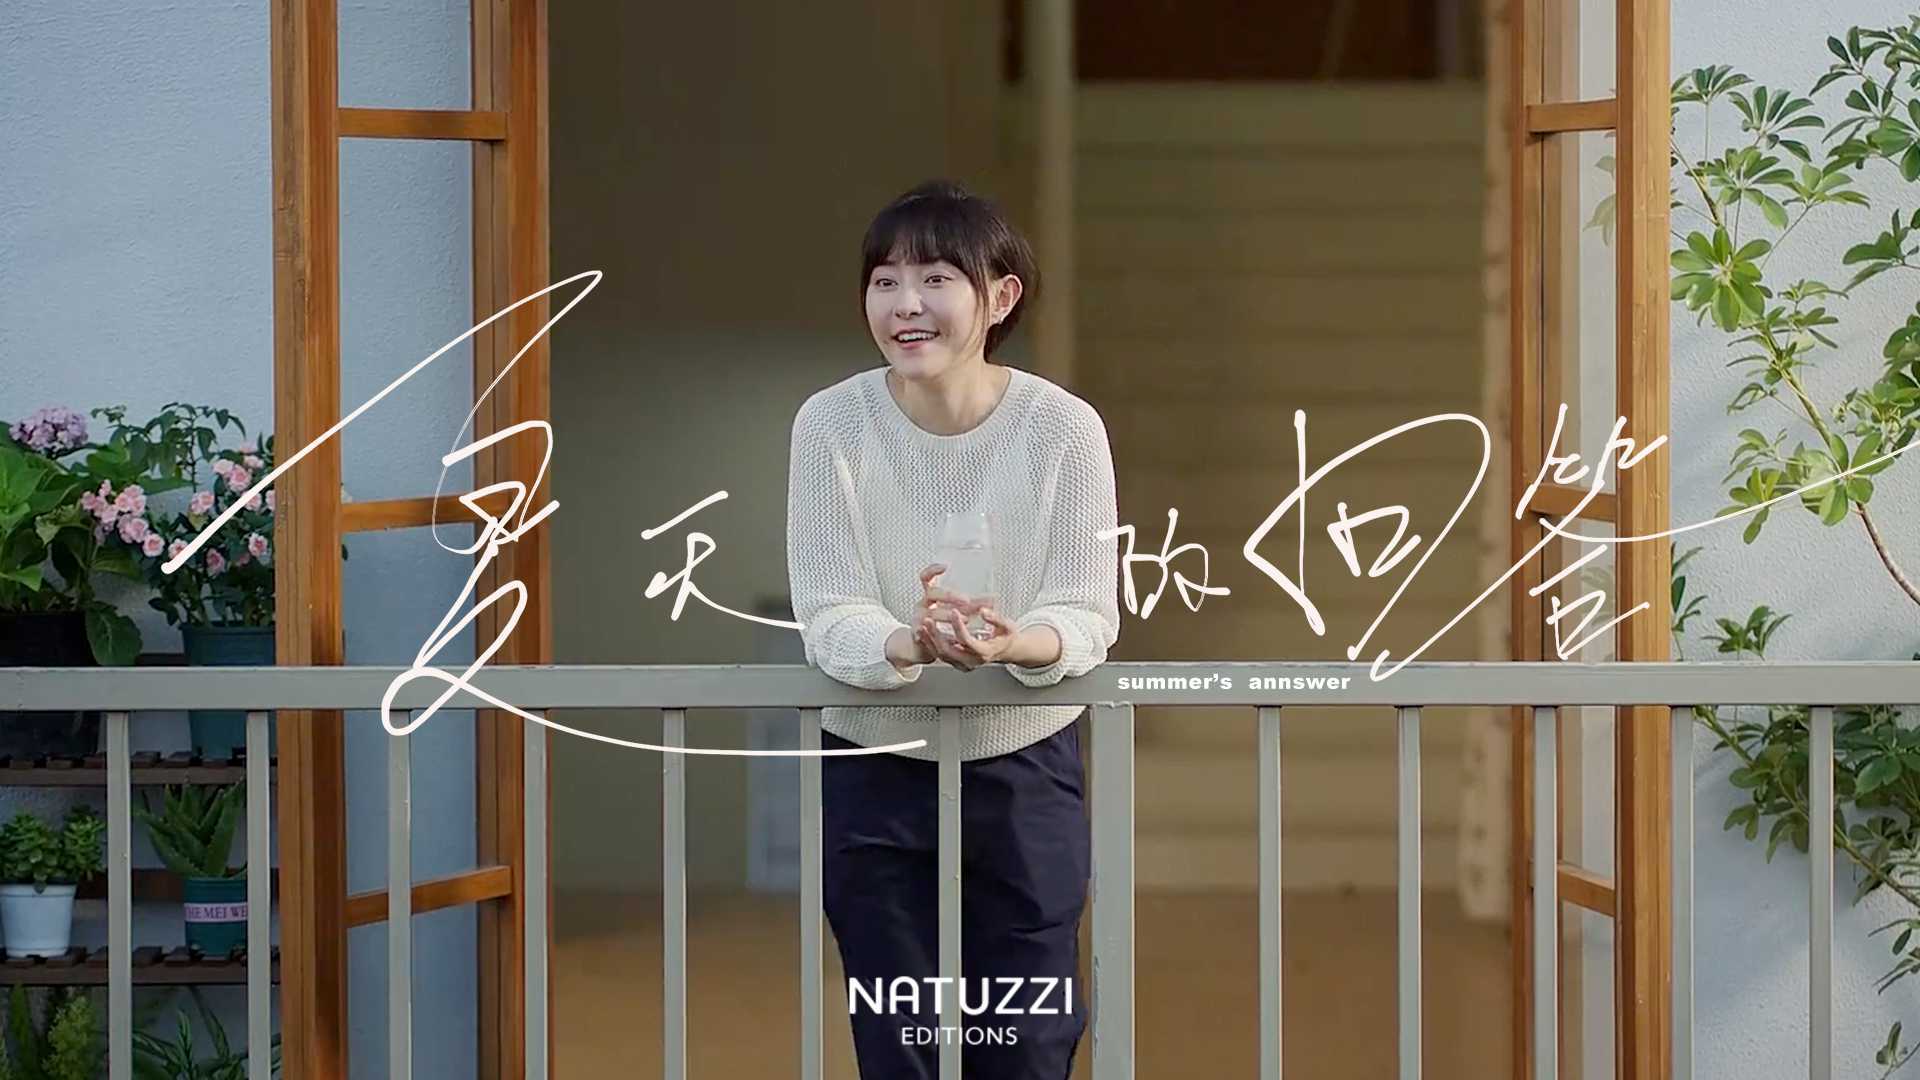 Natuzzi Editions | 夏天的回答-FOR THE SUMMER